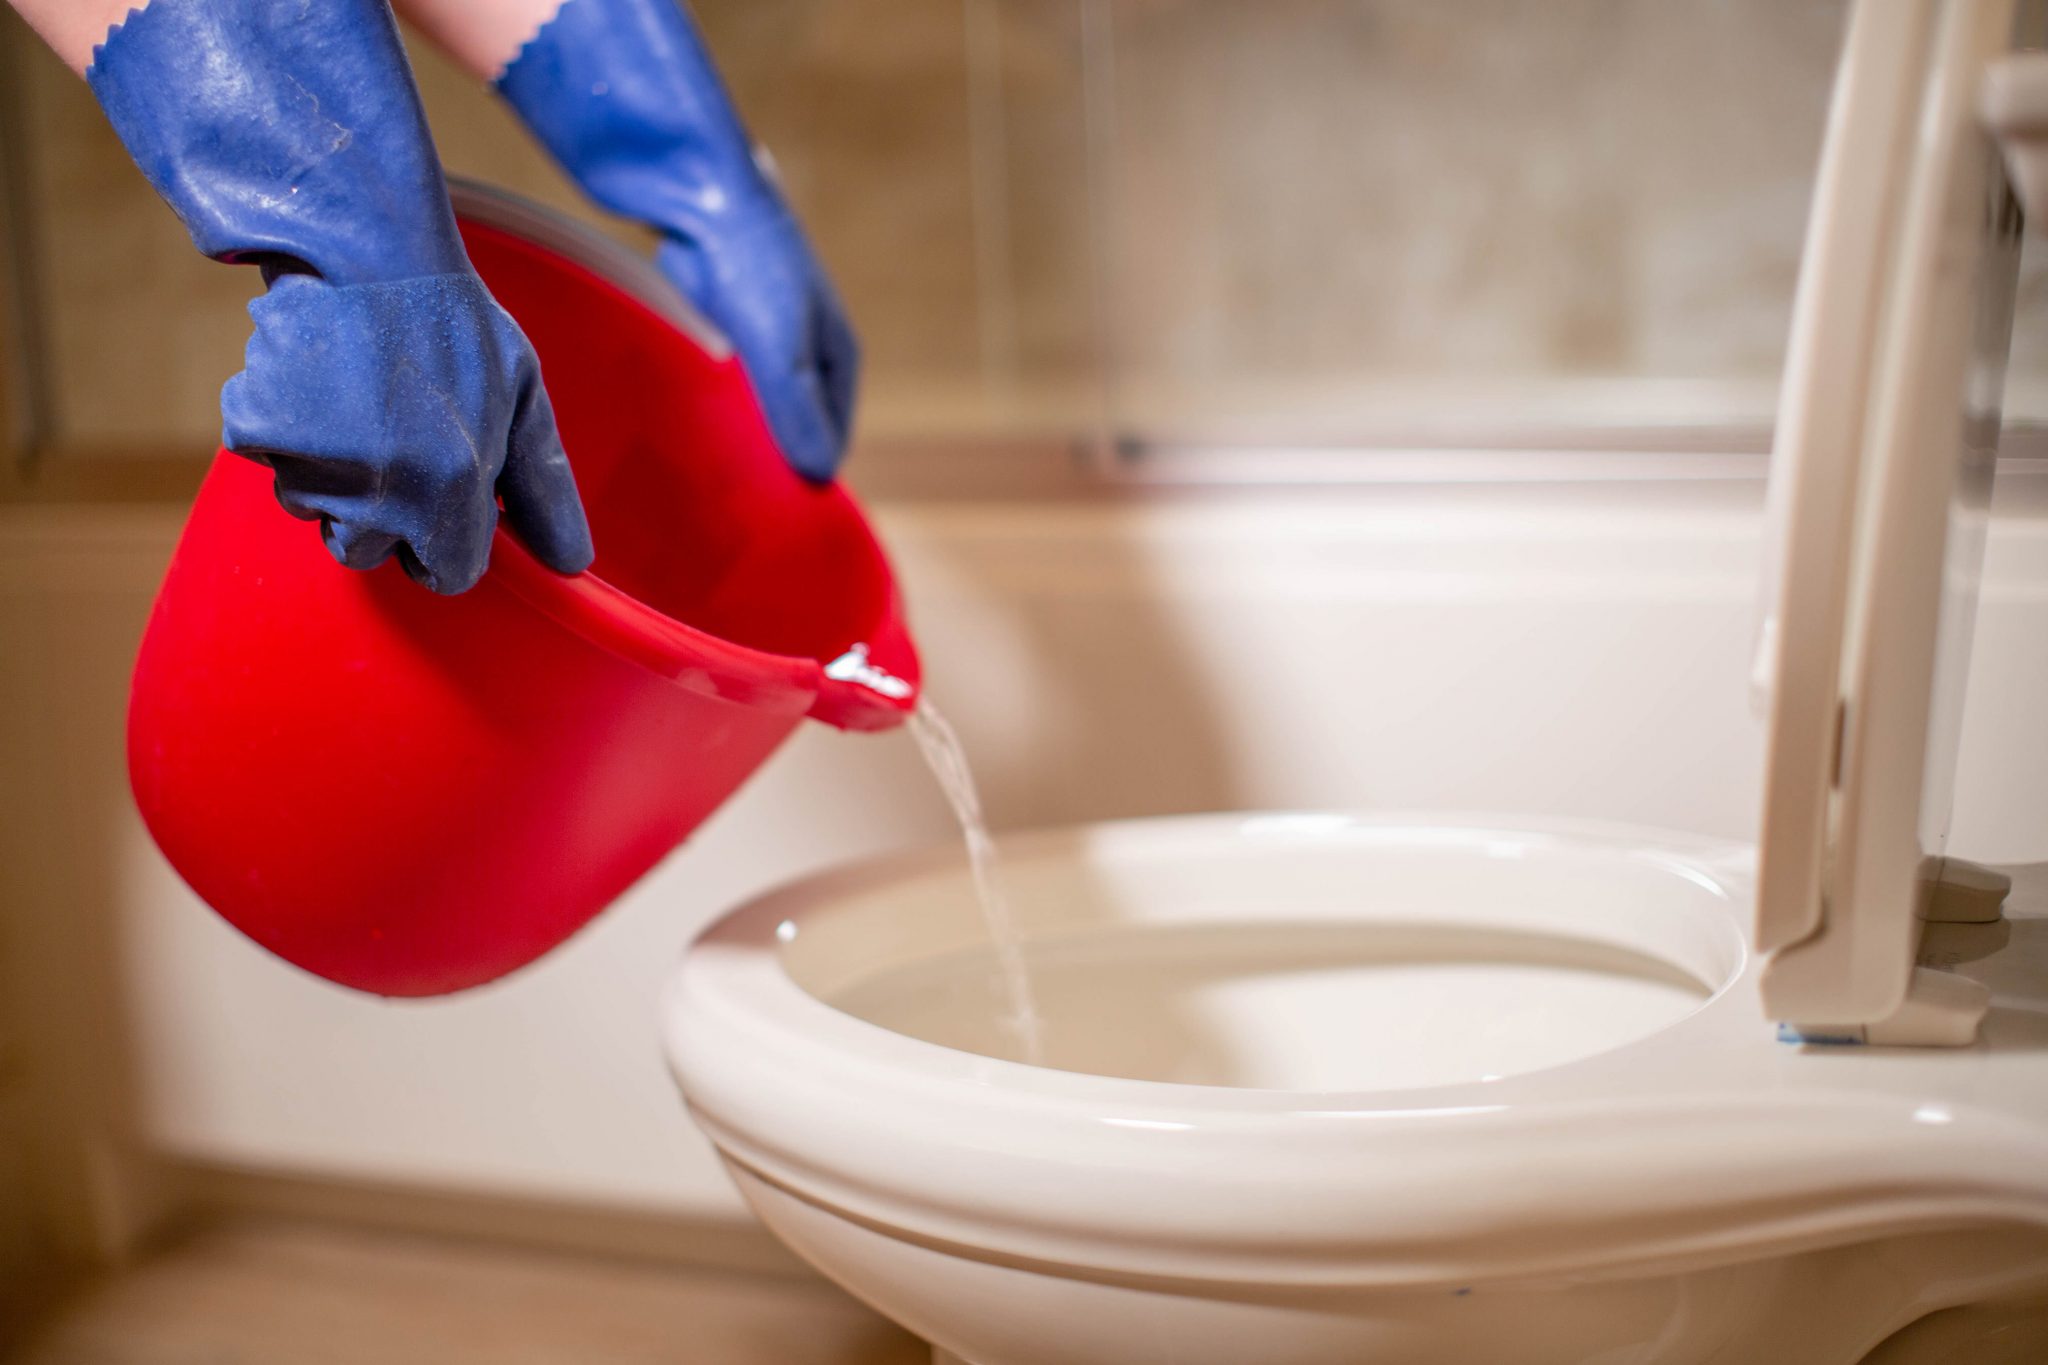 How To Unclog A Toilet When The Plunger Won’t Work